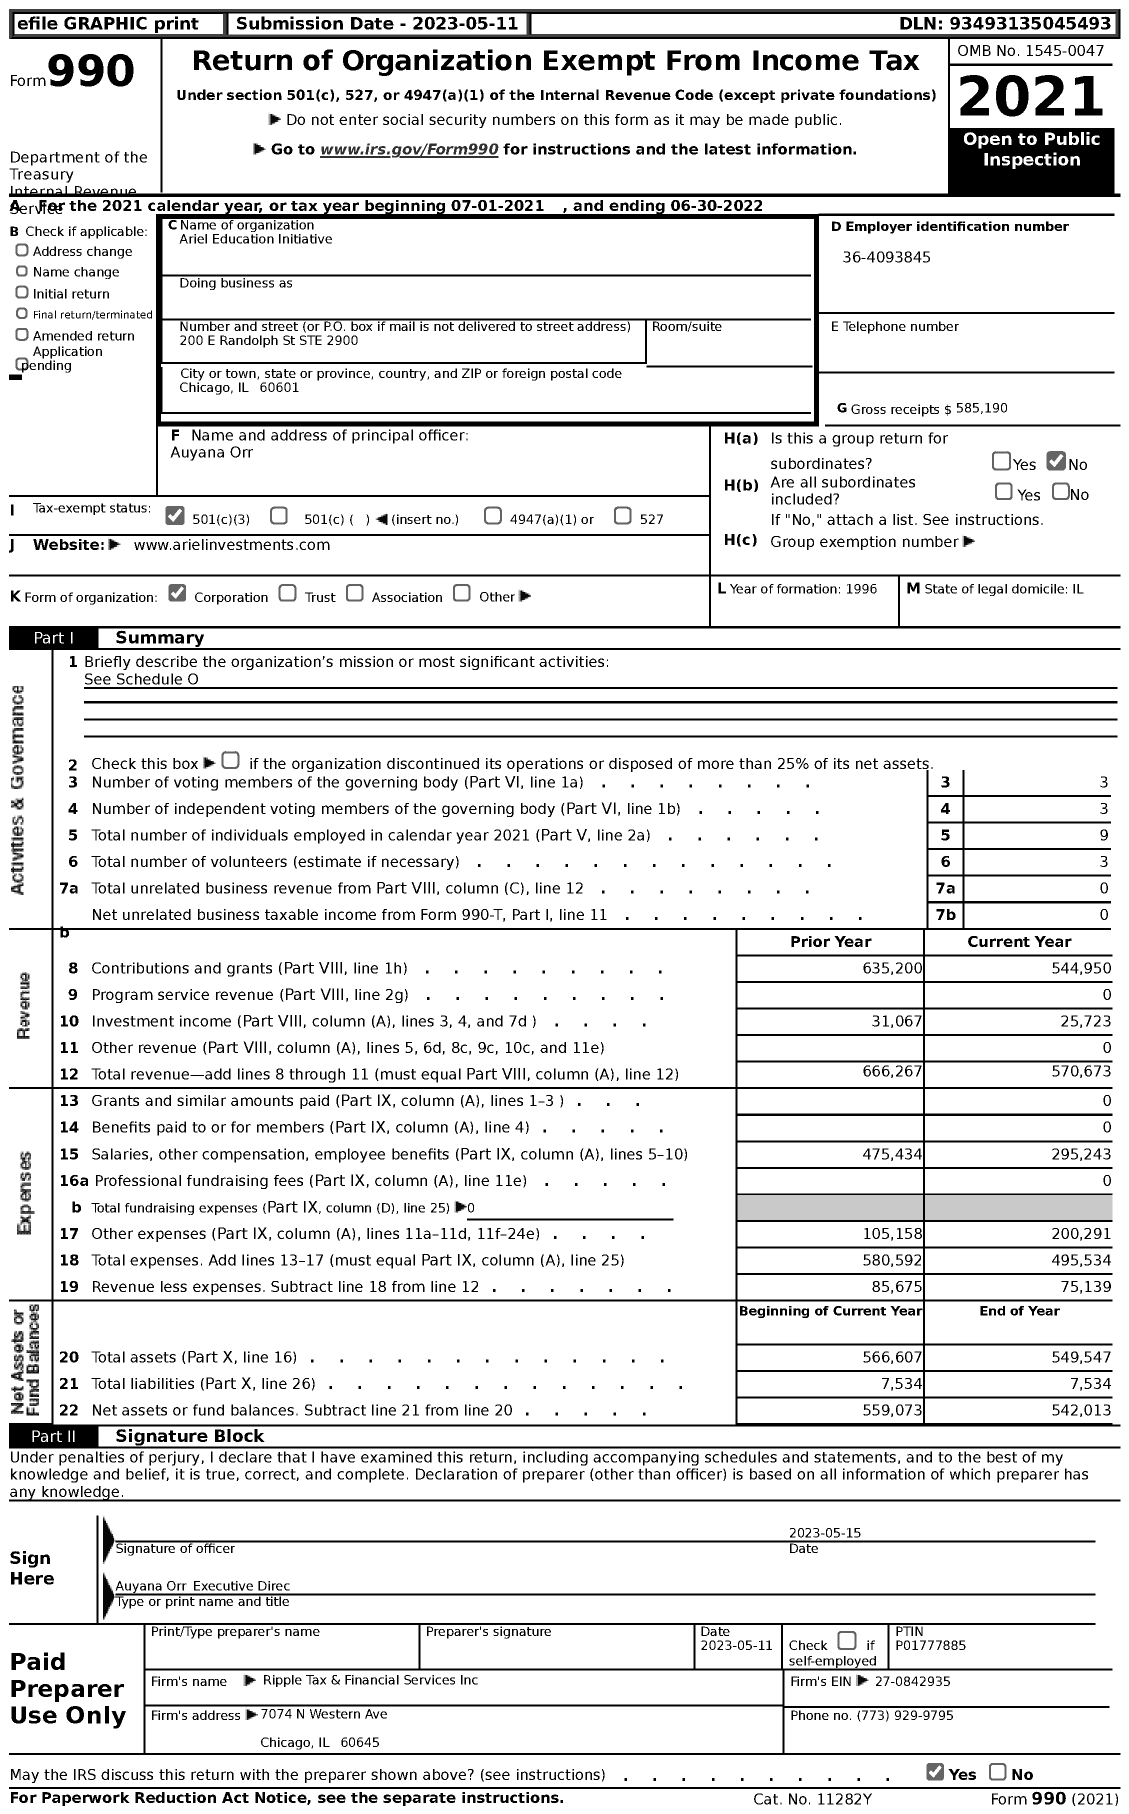 Image of first page of 2021 Form 990 for Ariel Education Initiative